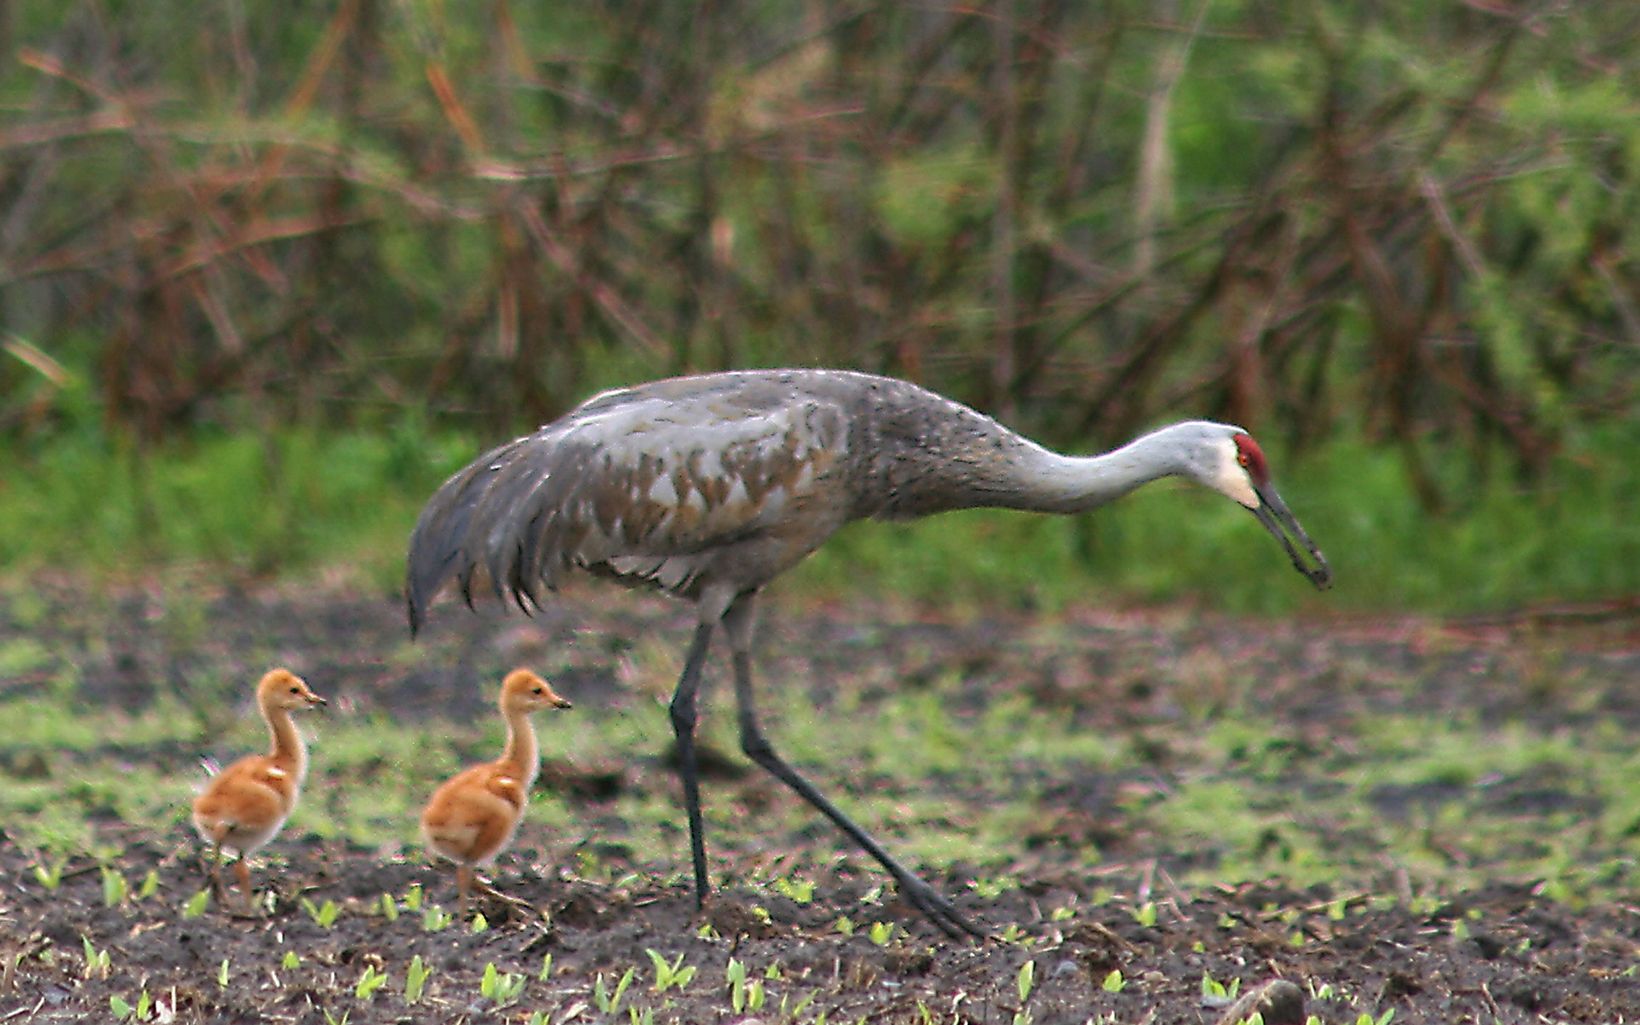  Sandhill cranes are one of the many species of birds that depend on the habitat at Chiwaukee Prairie.